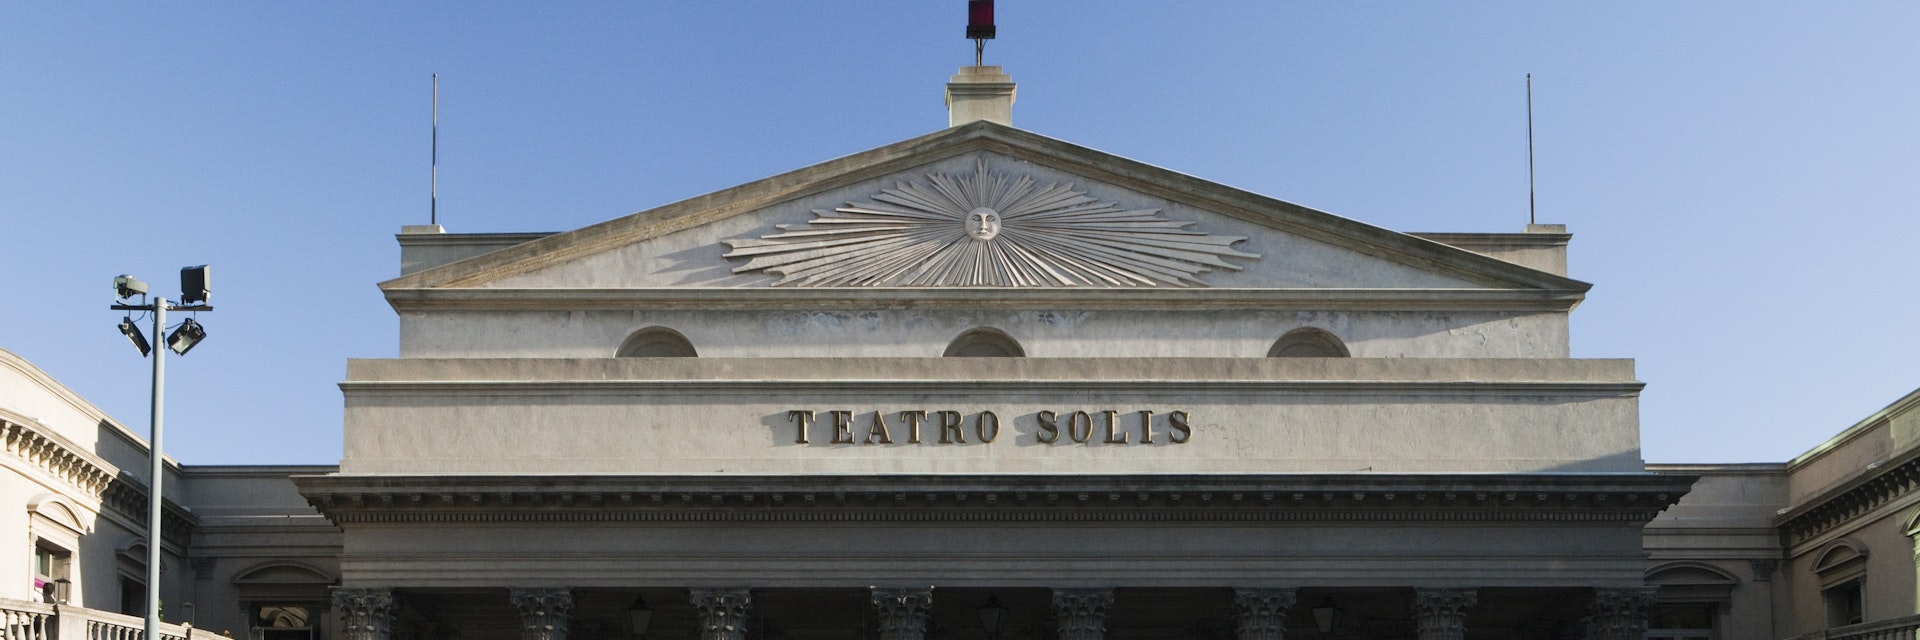 (GERMANY OUT) Teatro Solis (Solis Theatre), Uruguay's oldest theatre, built in 1856, located in Plaza Independencia.   (Photo by Rolf Schulten/ullstein bild via Getty Images)